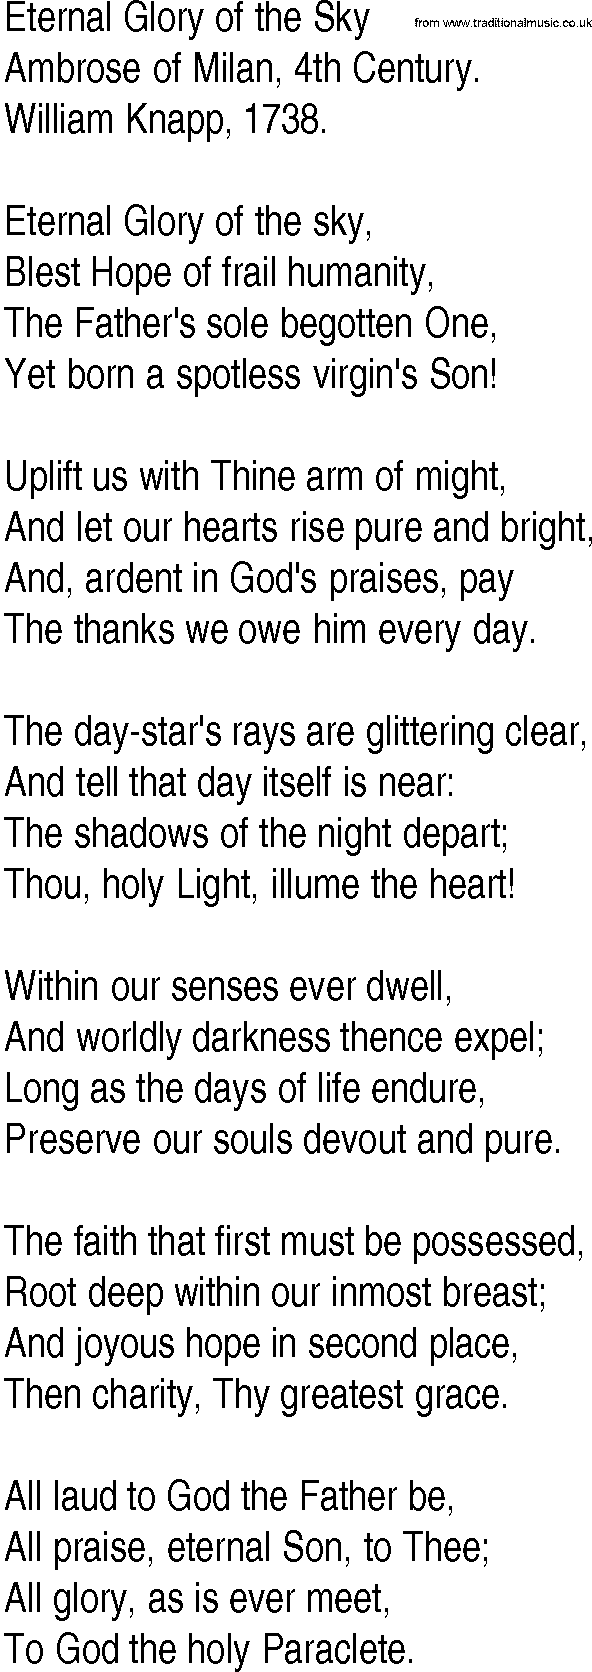 Hymn and Gospel Song: Eternal Glory of the Sky by Ambrose of Milan th Century lyrics